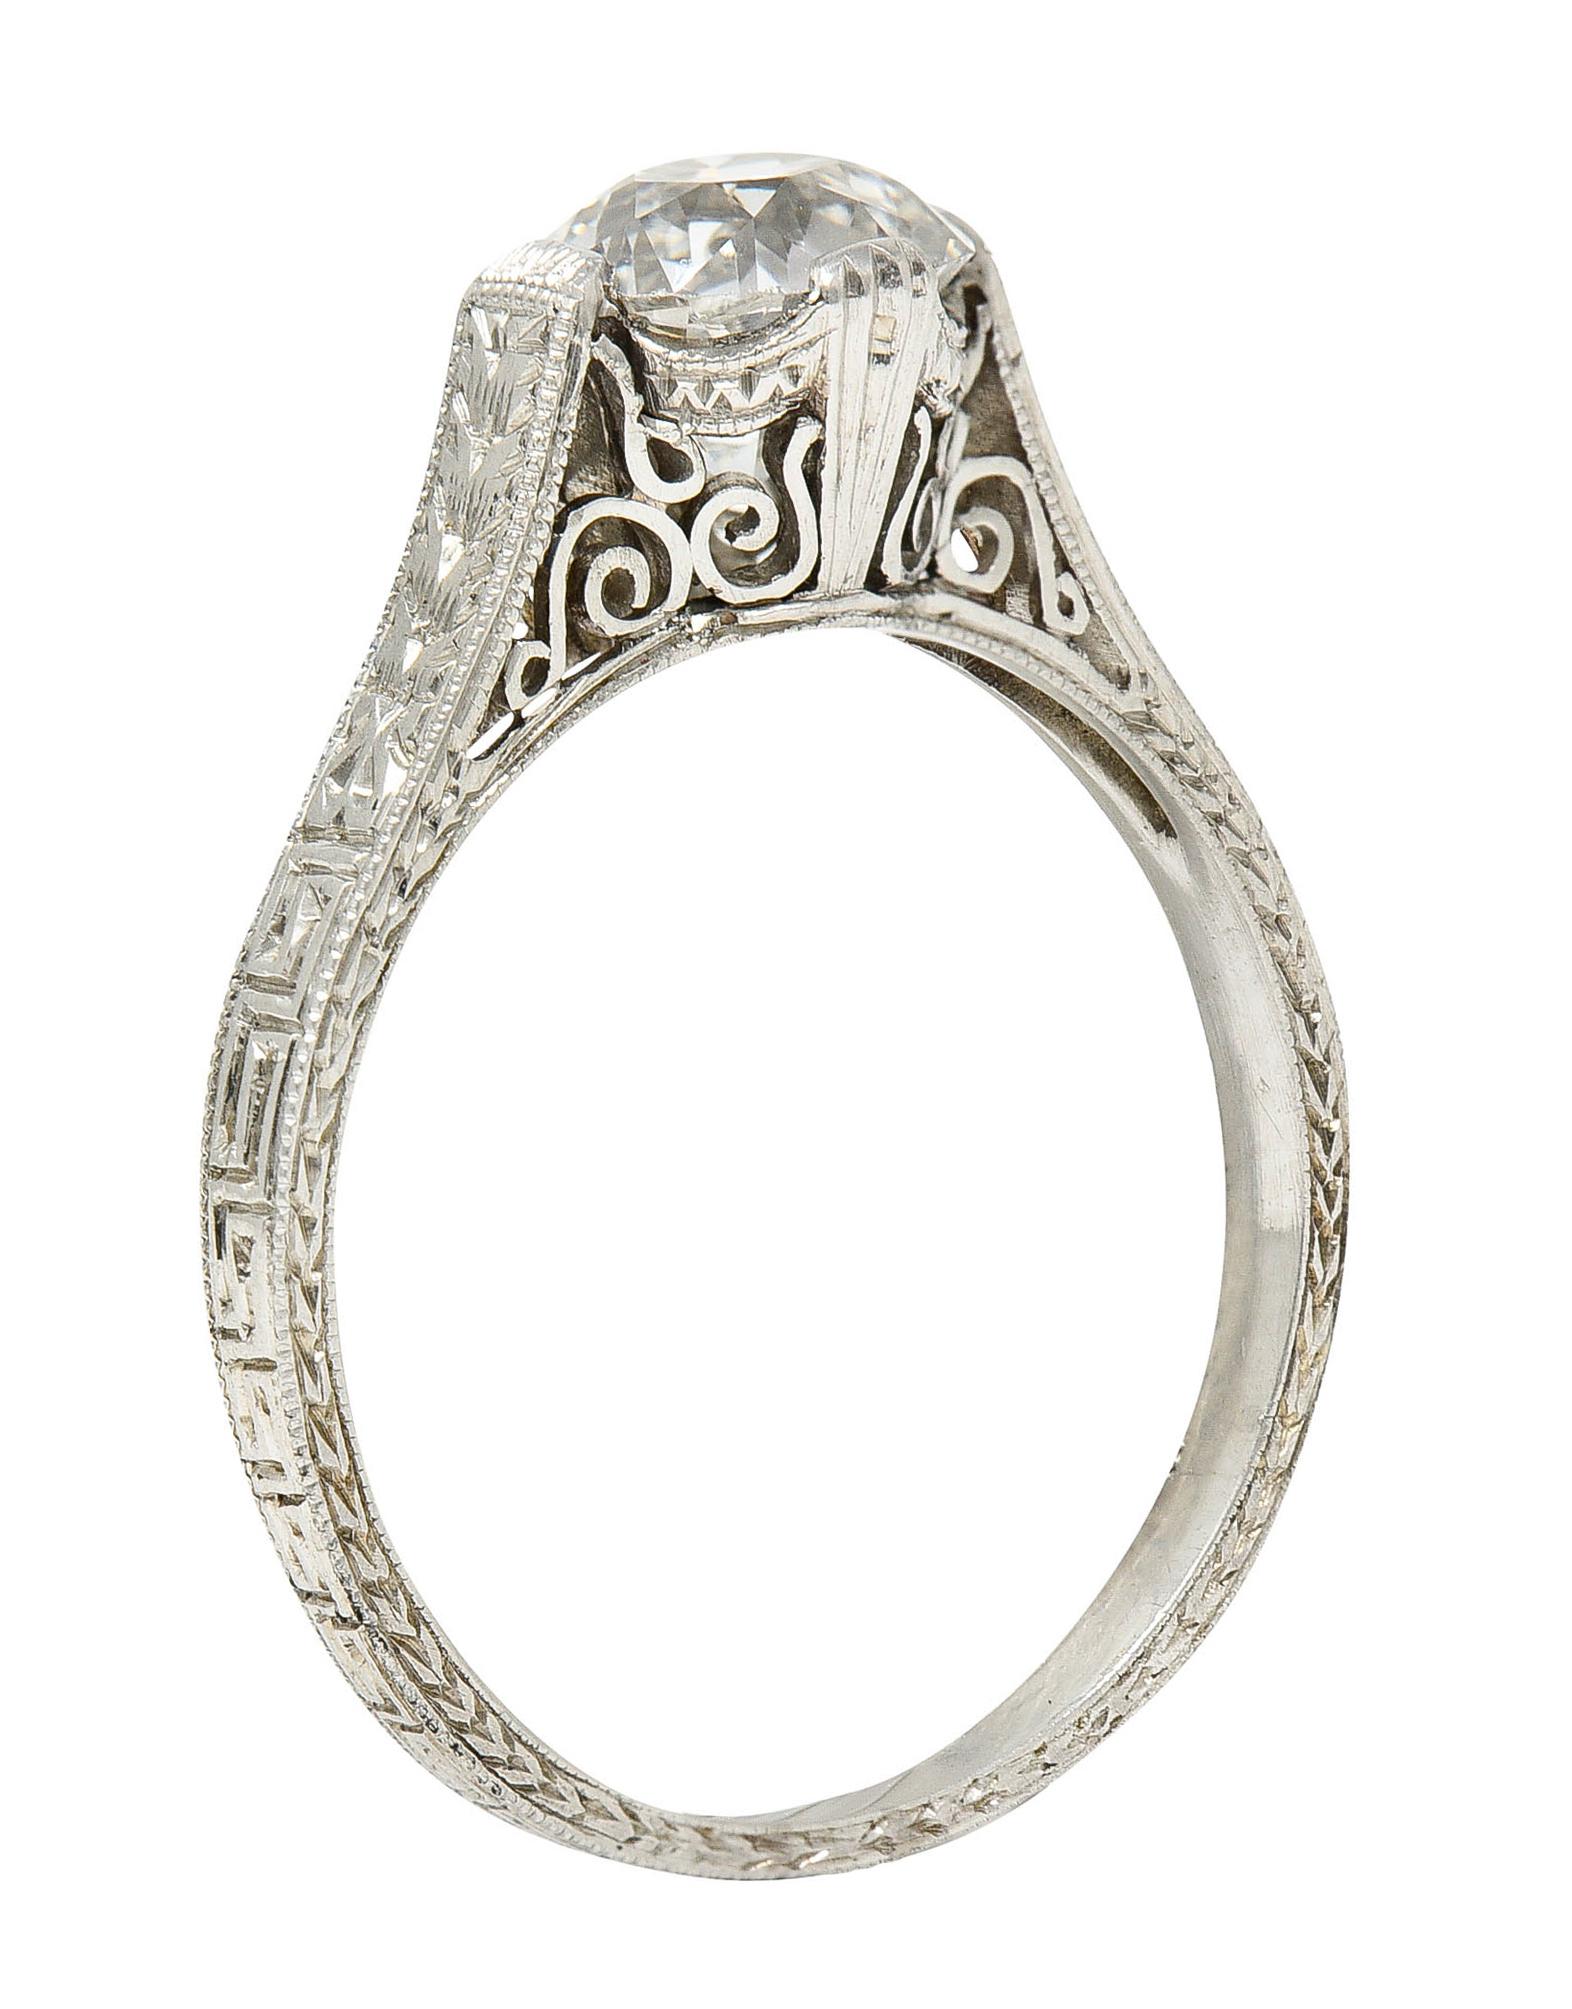 Centering an old mine cut diamond weighing 1.15 carats - H color with SI2 clarity

Set by wide prongs with a scrolled volute gallery

Fully engraved shank with foliate and Greek key motifs - accented by milgrain

Stamped Platinum

Circa: 1930s

Ring